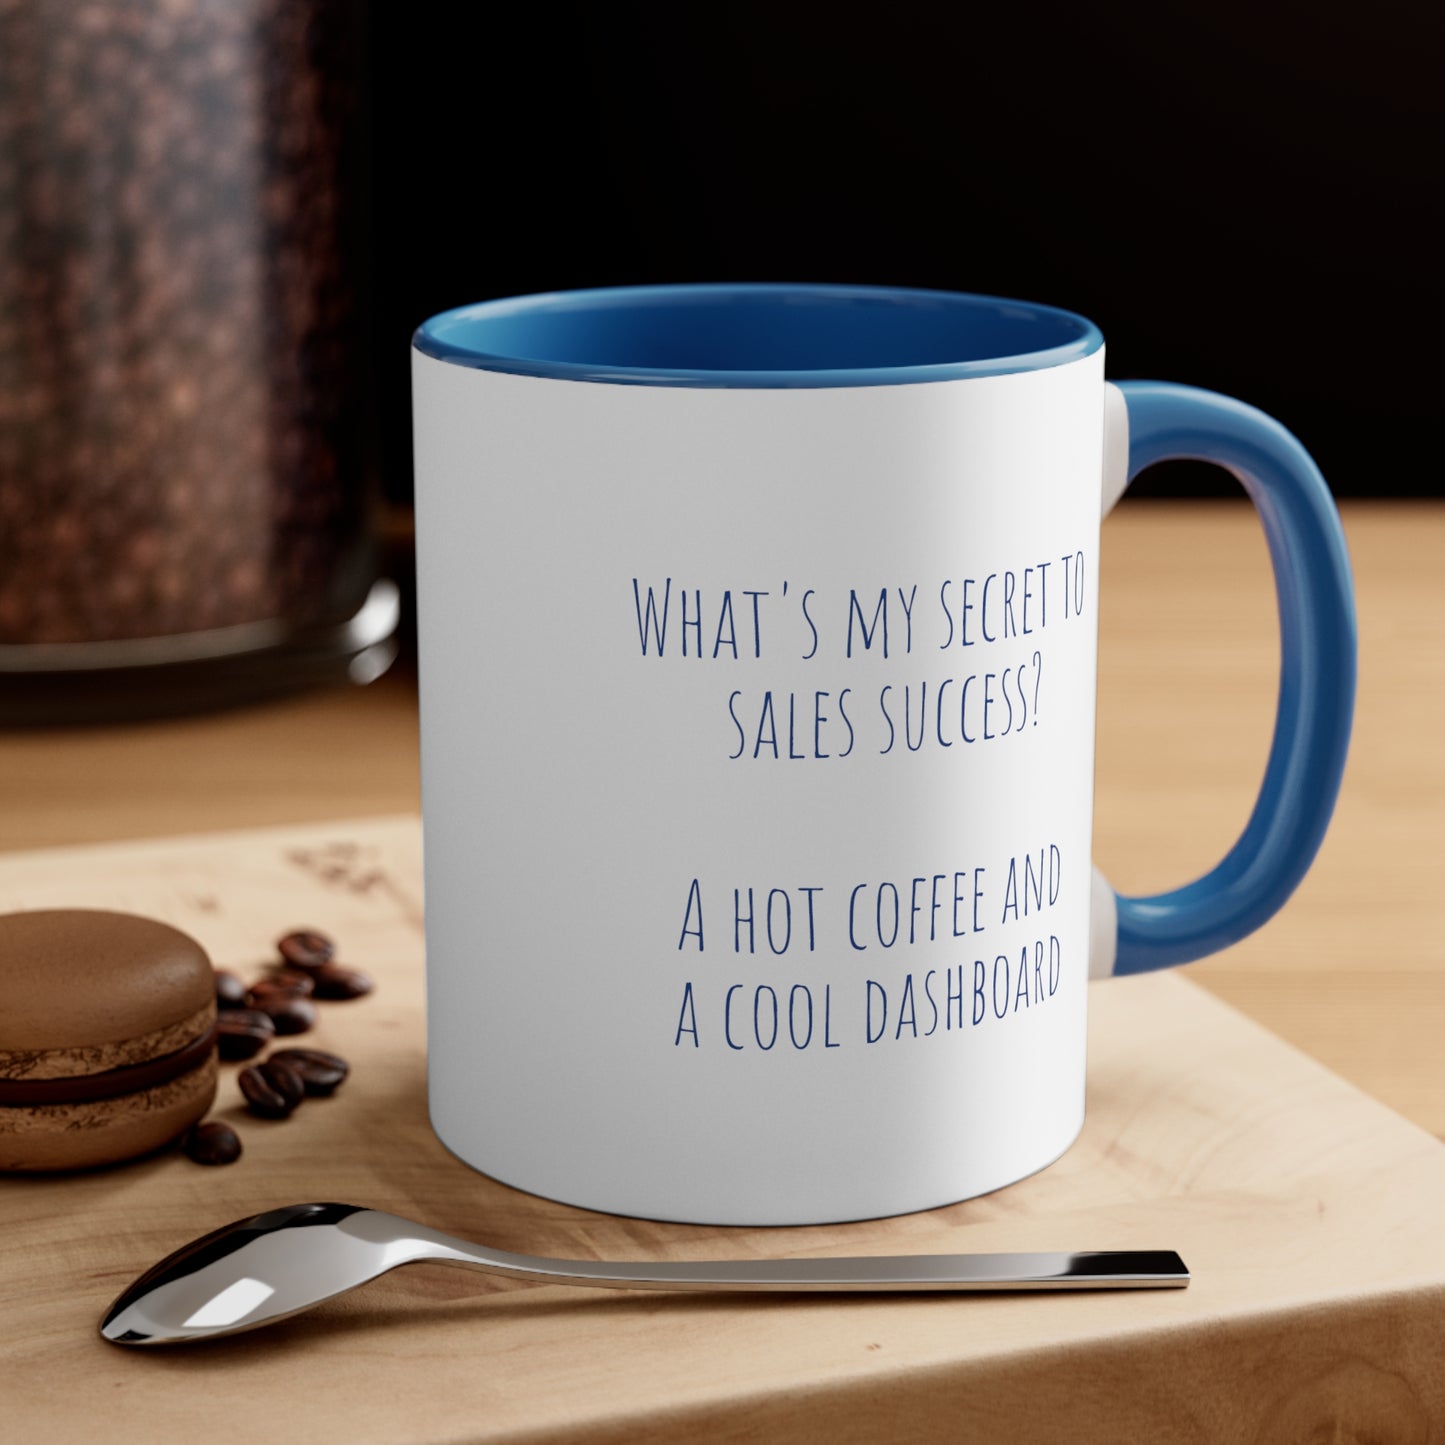 What's my secret to sales success? A hot coffee and a cool dashboard